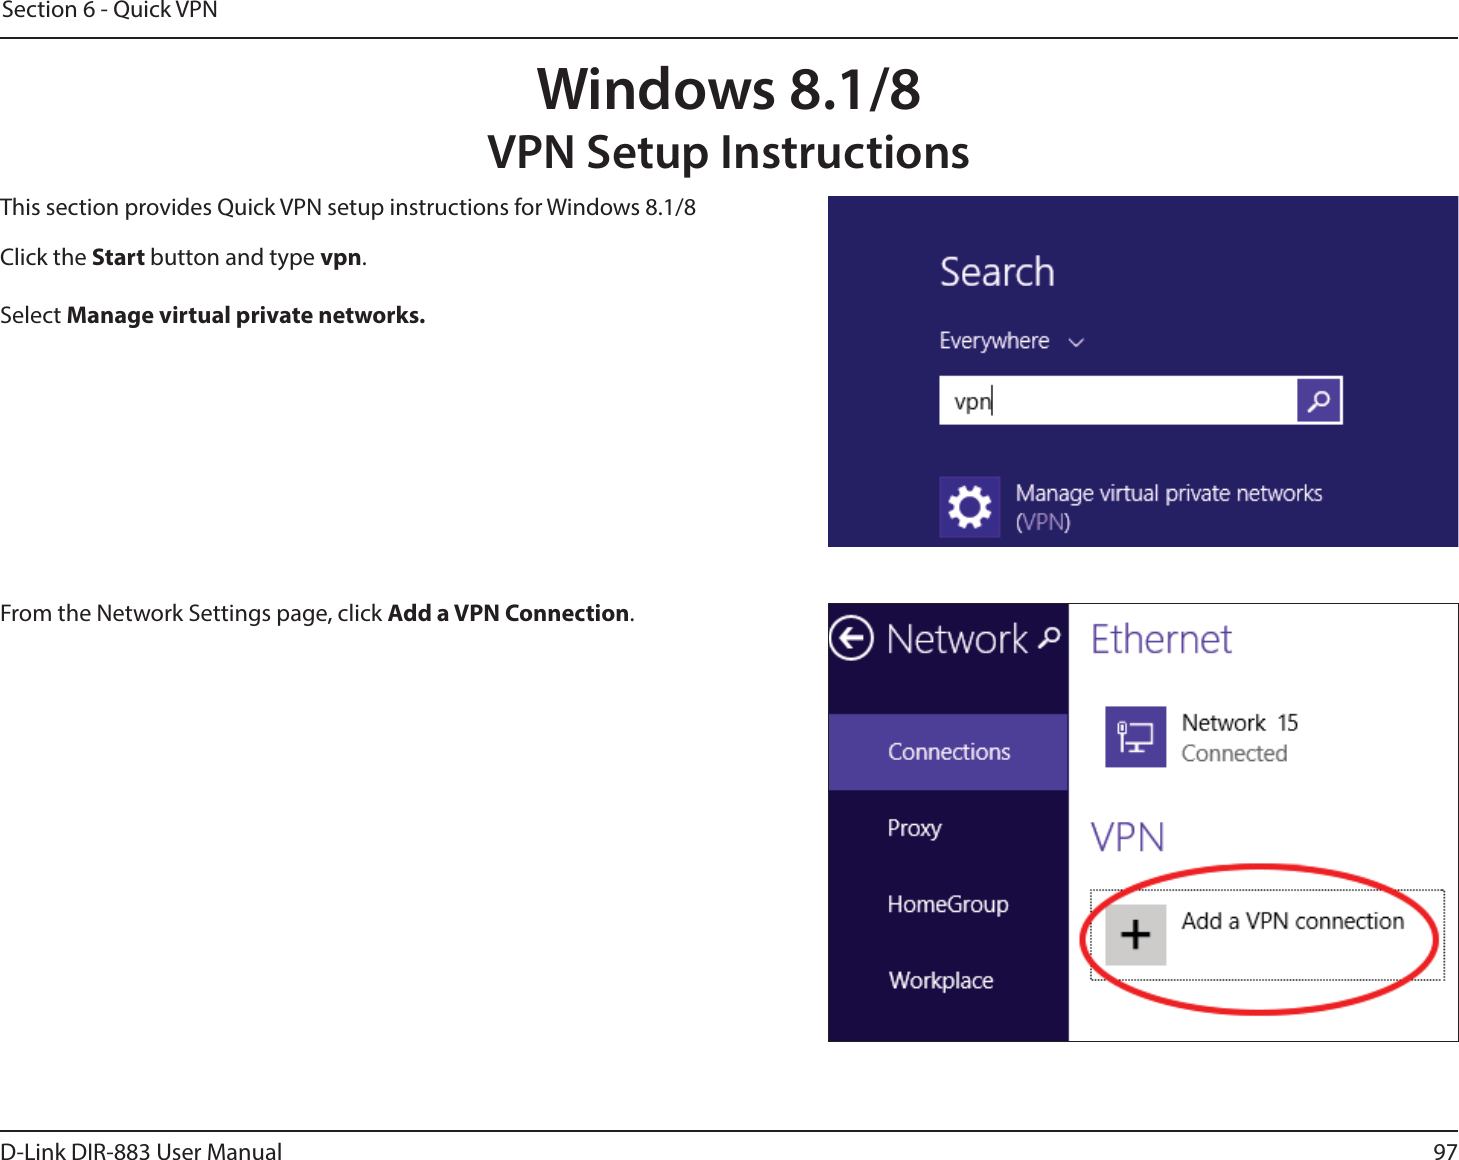 97D-Link DIR-883 User ManualSection 6 - Quick VPNWindows 8.1/8VPN Setup InstructionsThis section provides Quick VPN setup instructions for Windows 8.1/8Click the Start button and type vpn. Select Manage virtual private networks.From the Network Settings page, click Add a VPN Connection.